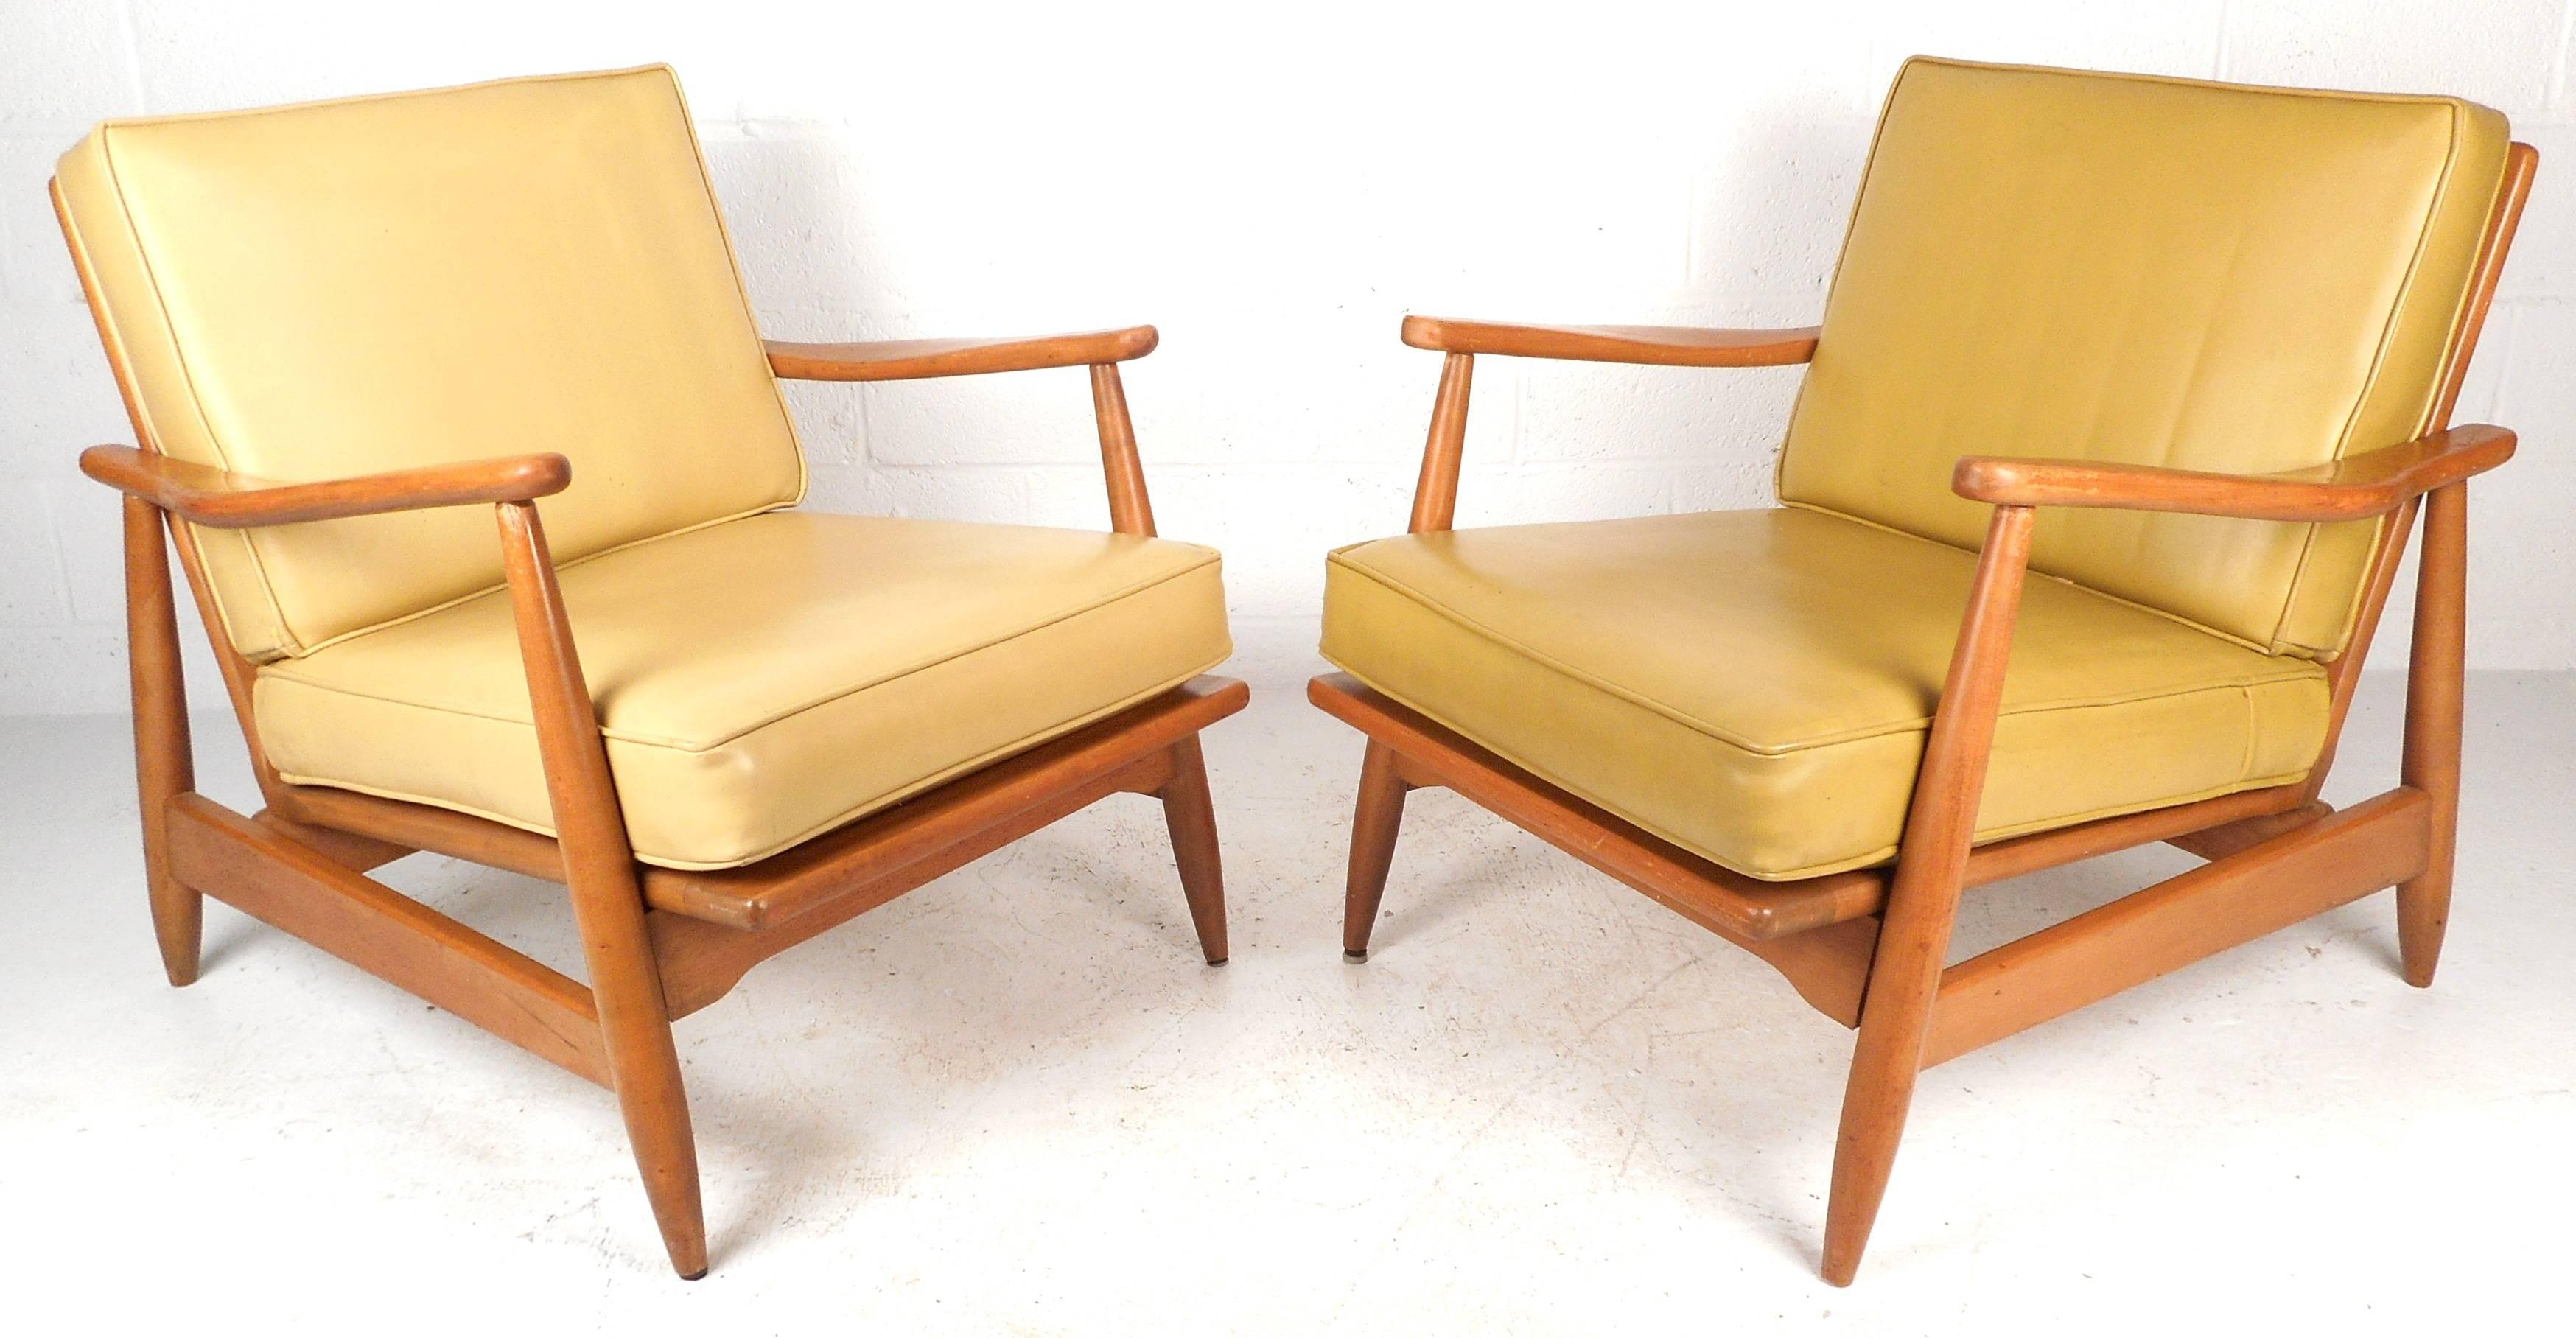 Elegant pair of Mid-Century Modern lounge chairs feature sculpted armrests, tapered legs, spindle backs, and comfortable vinyl cushions. The stylish design and vintage maple finish make them ideal for any interior. Please confirm item location (NY